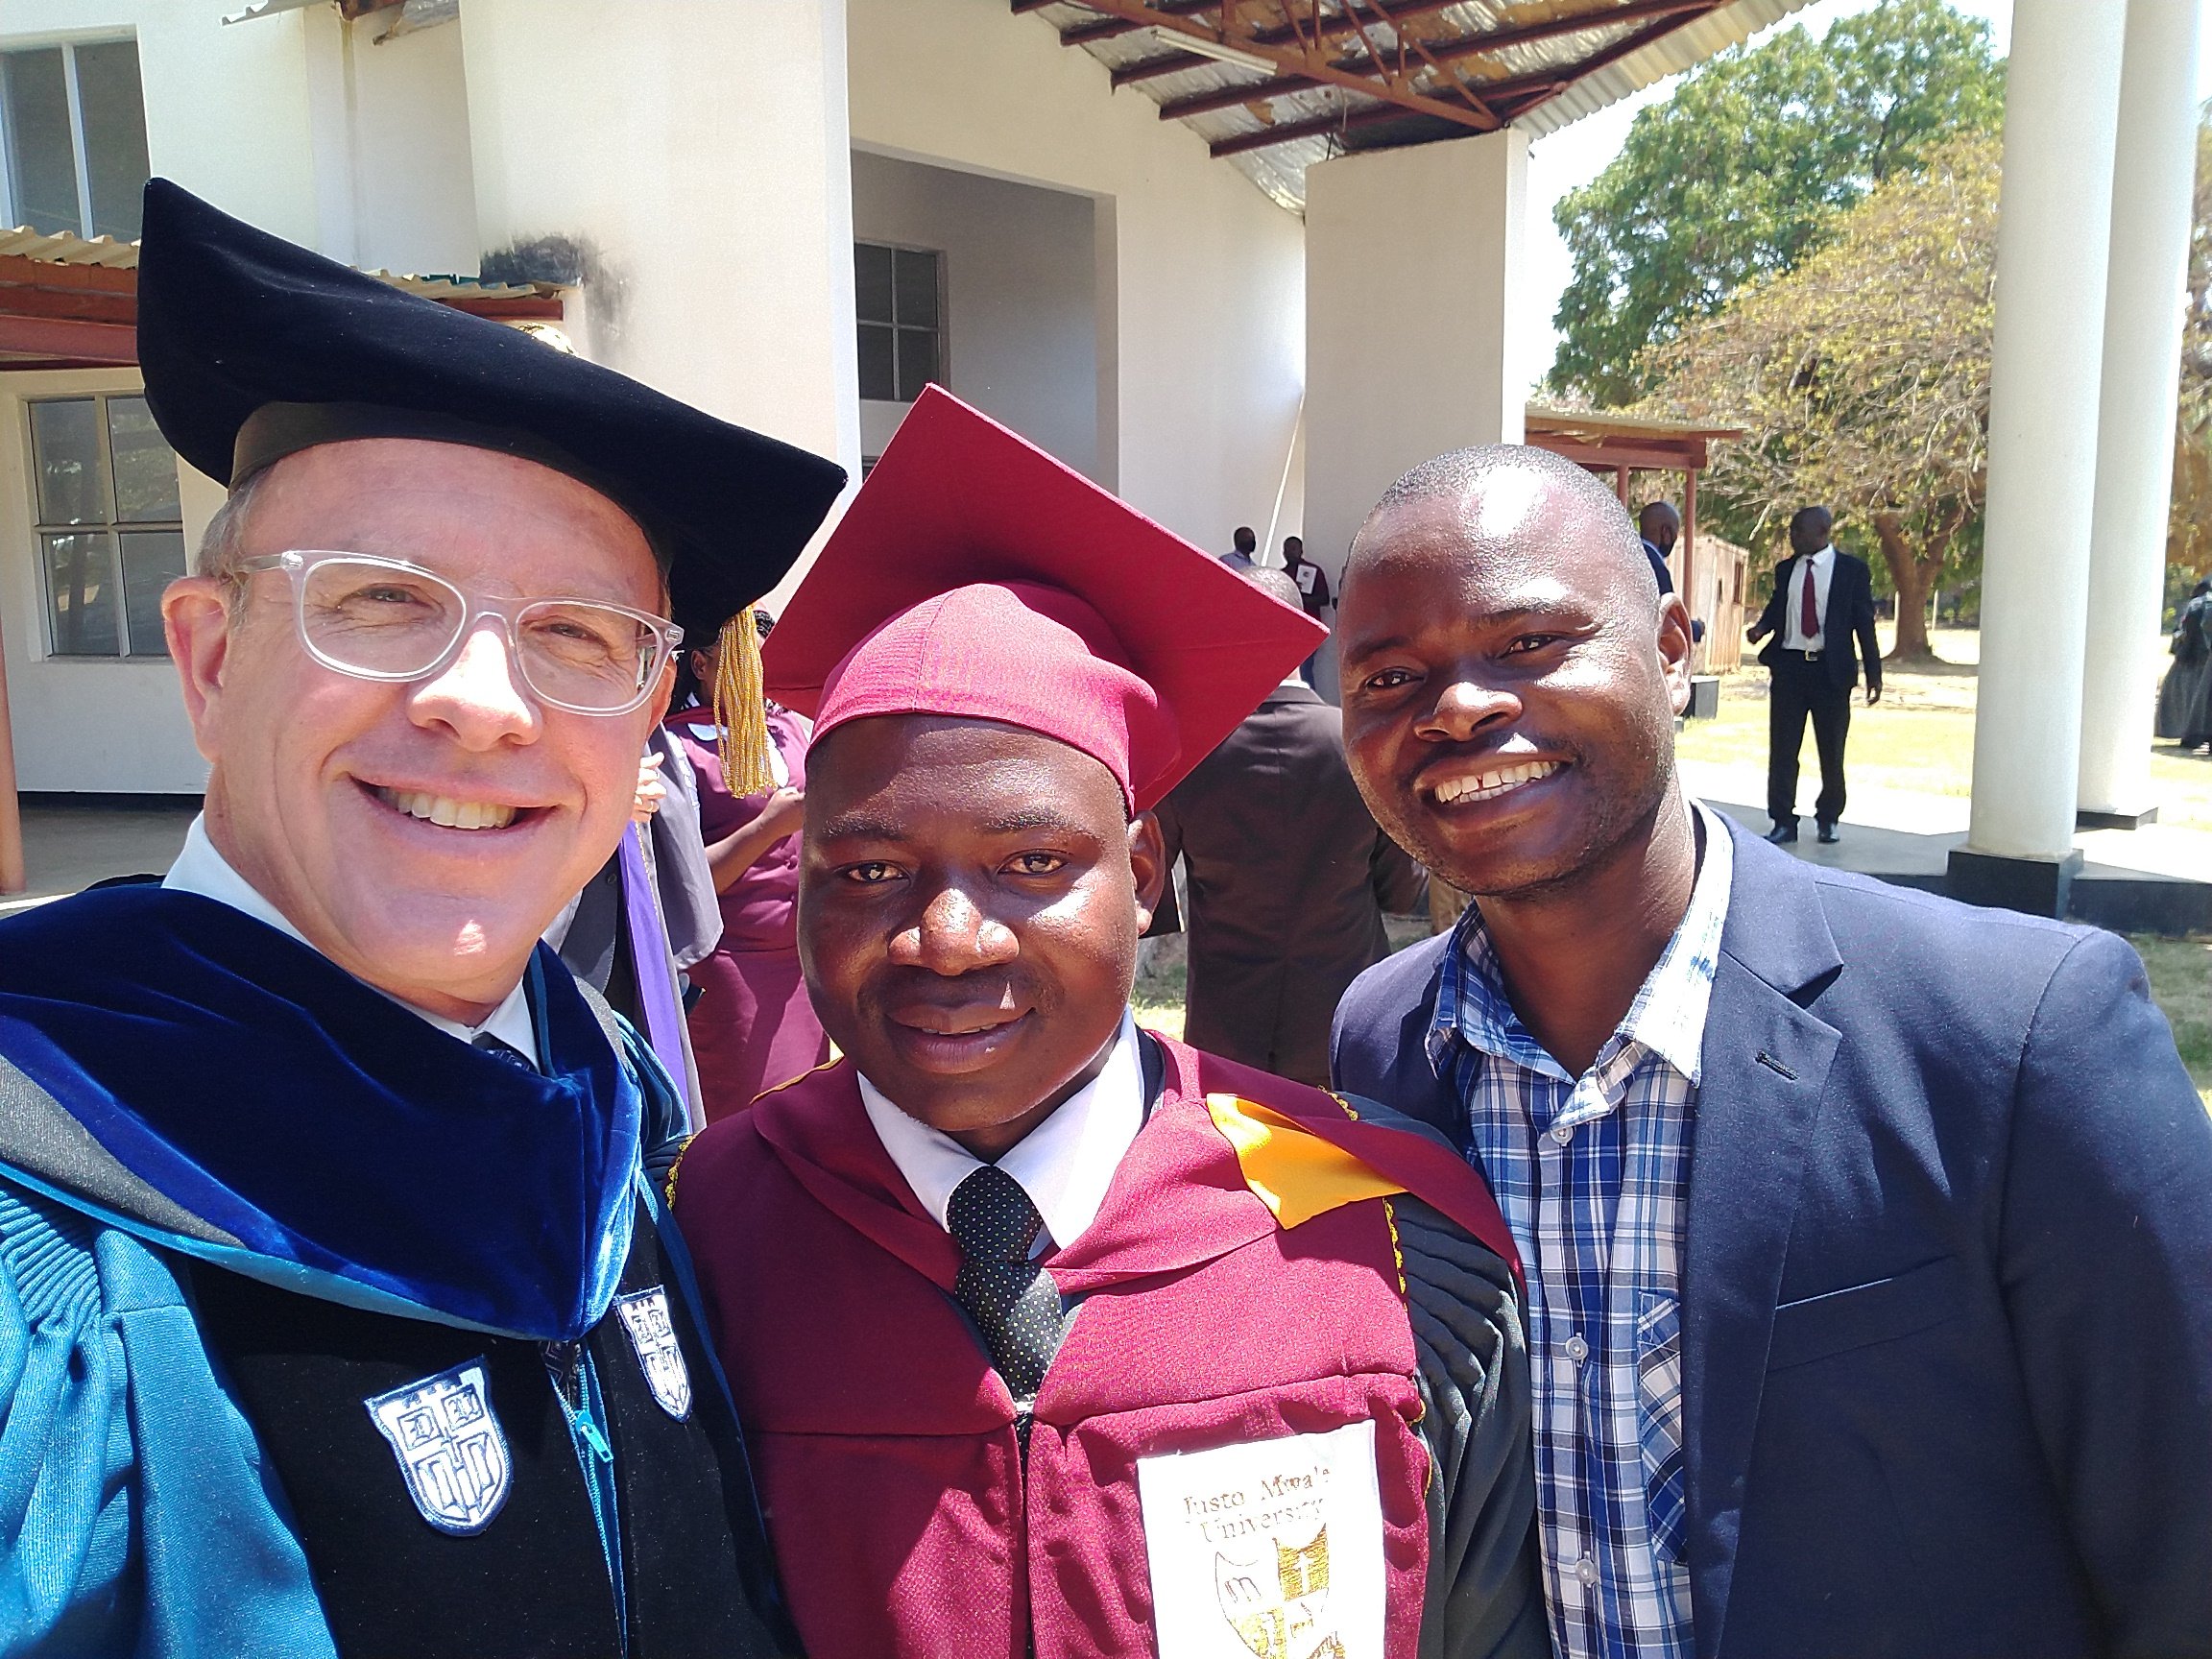 Dustin, John Mokotha, and Khumbo Mkandawire at graduation. Having just graduated, John is already pastor of several thousand church members in Malawi. Khumbo hopes to become a theology lecturer.